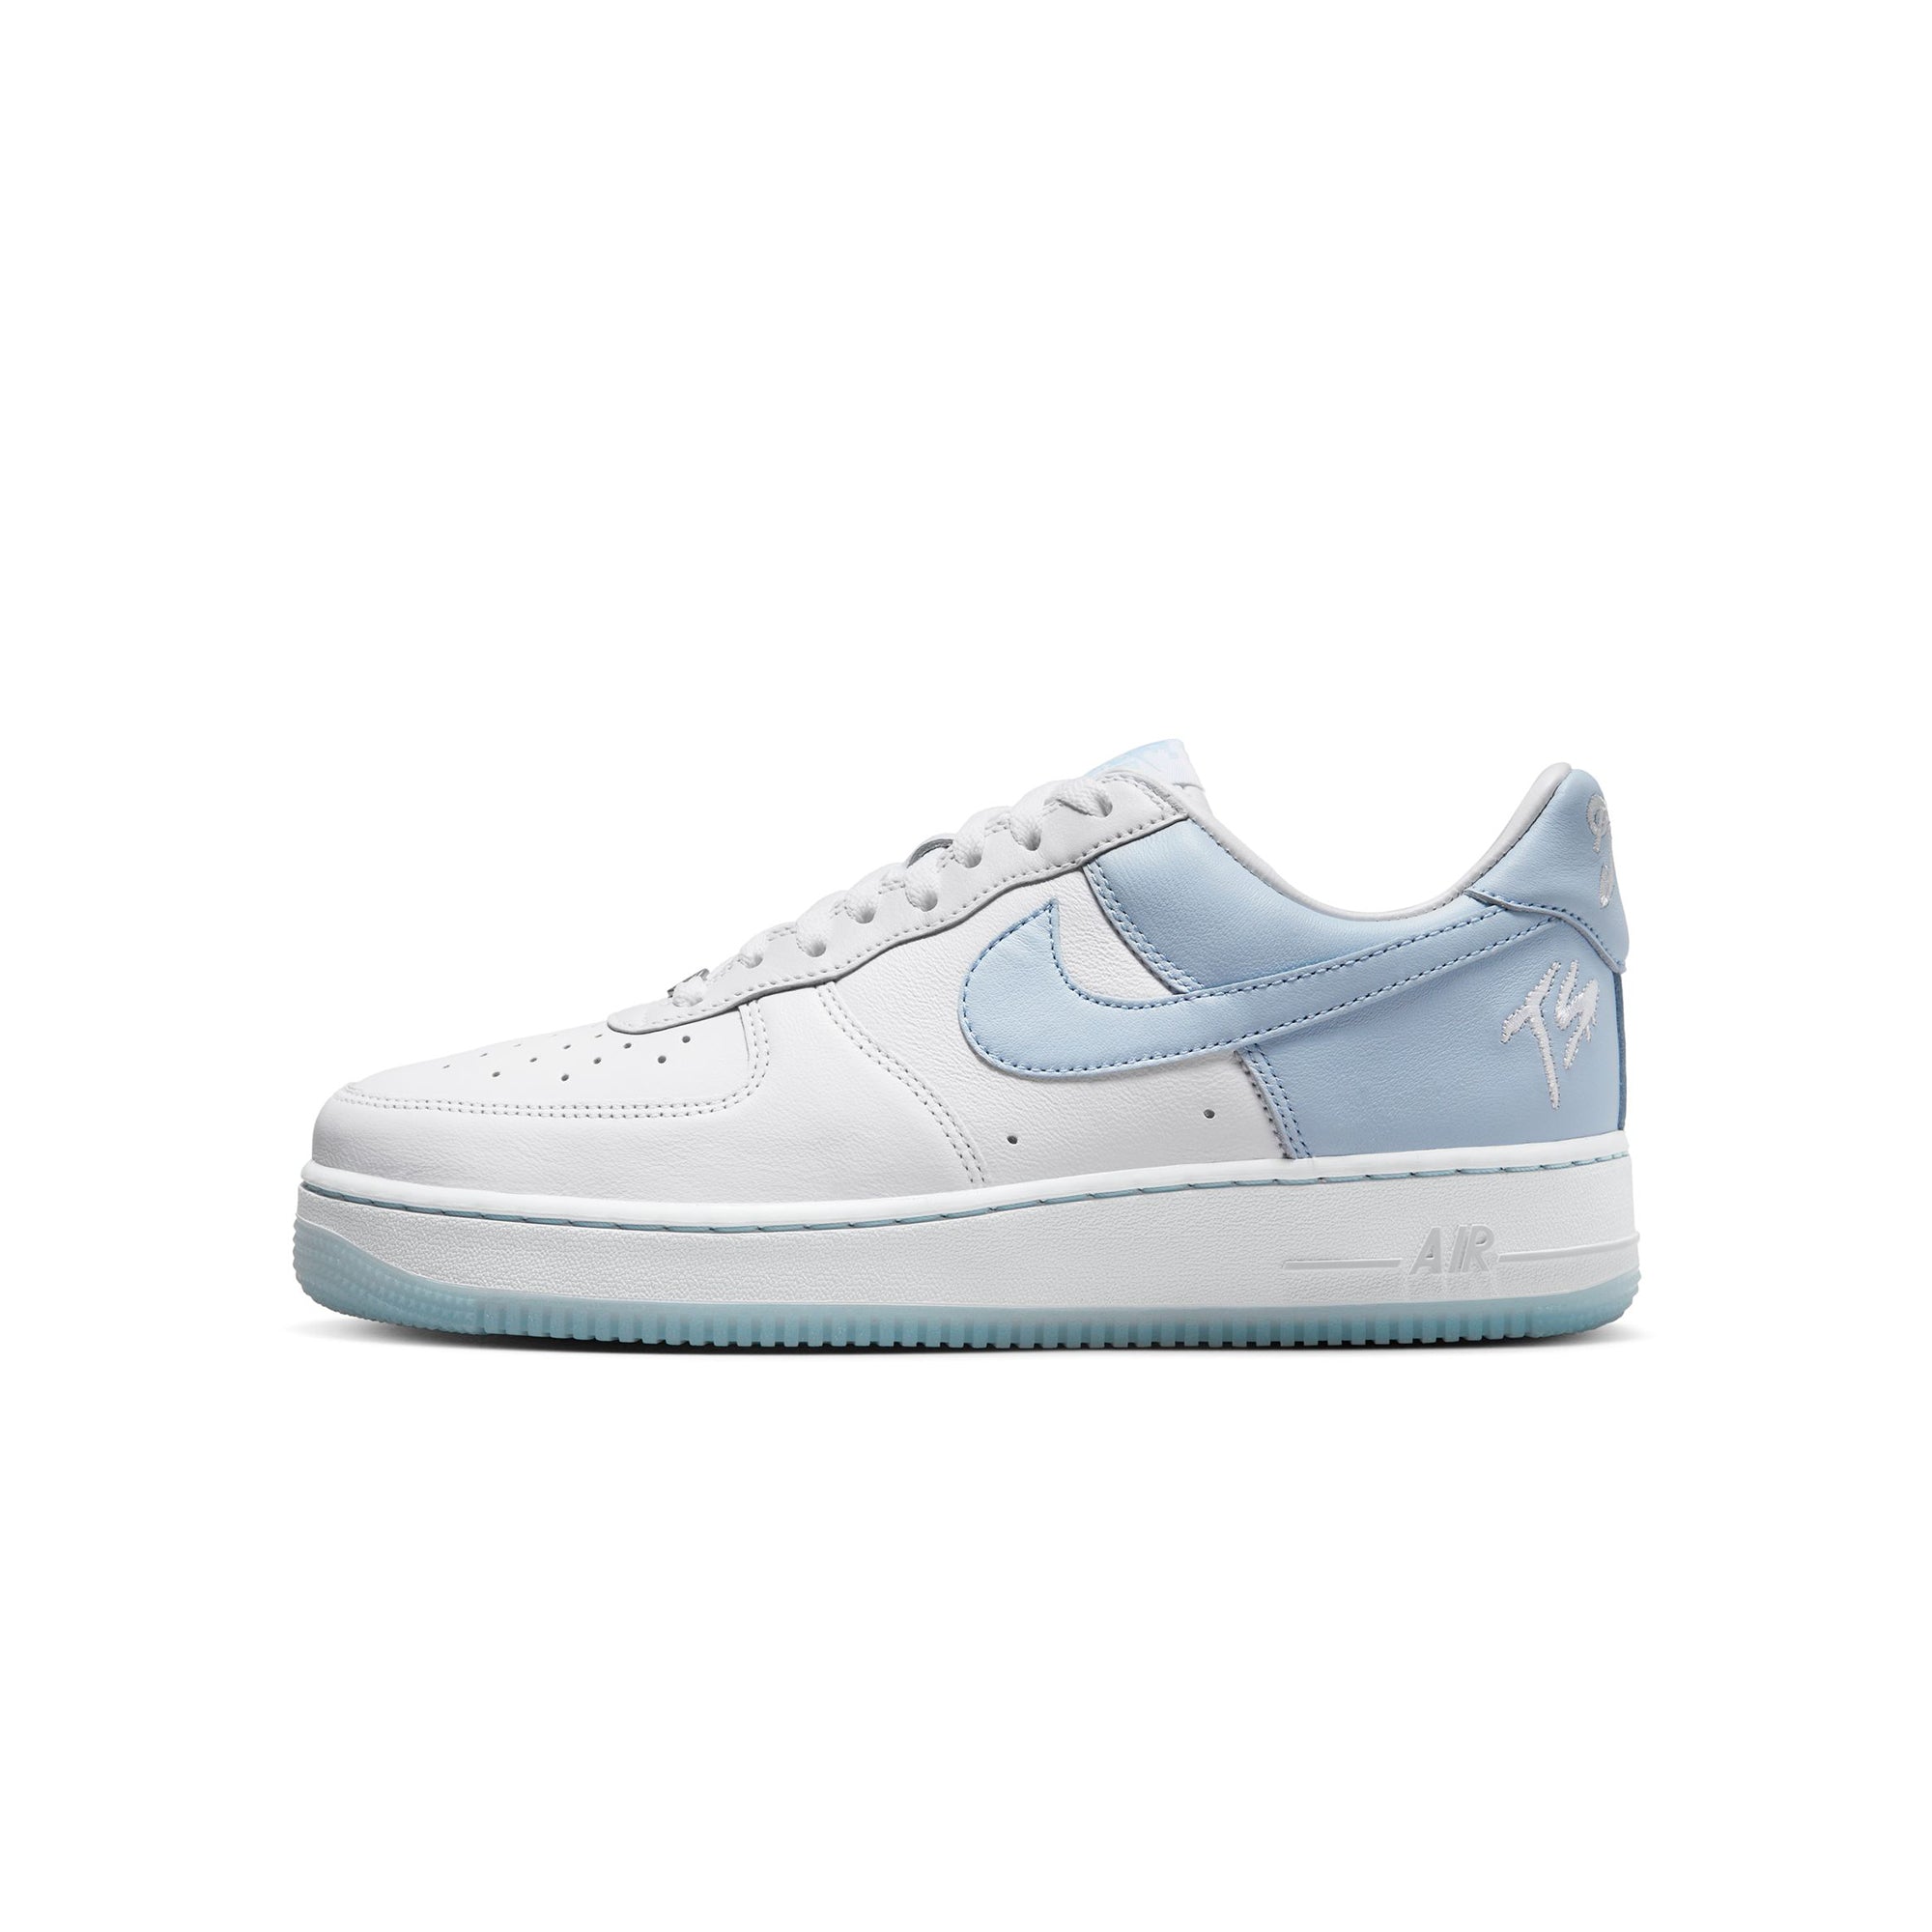 Nike x Terror Squad Air Force 1 Low QS Shoes